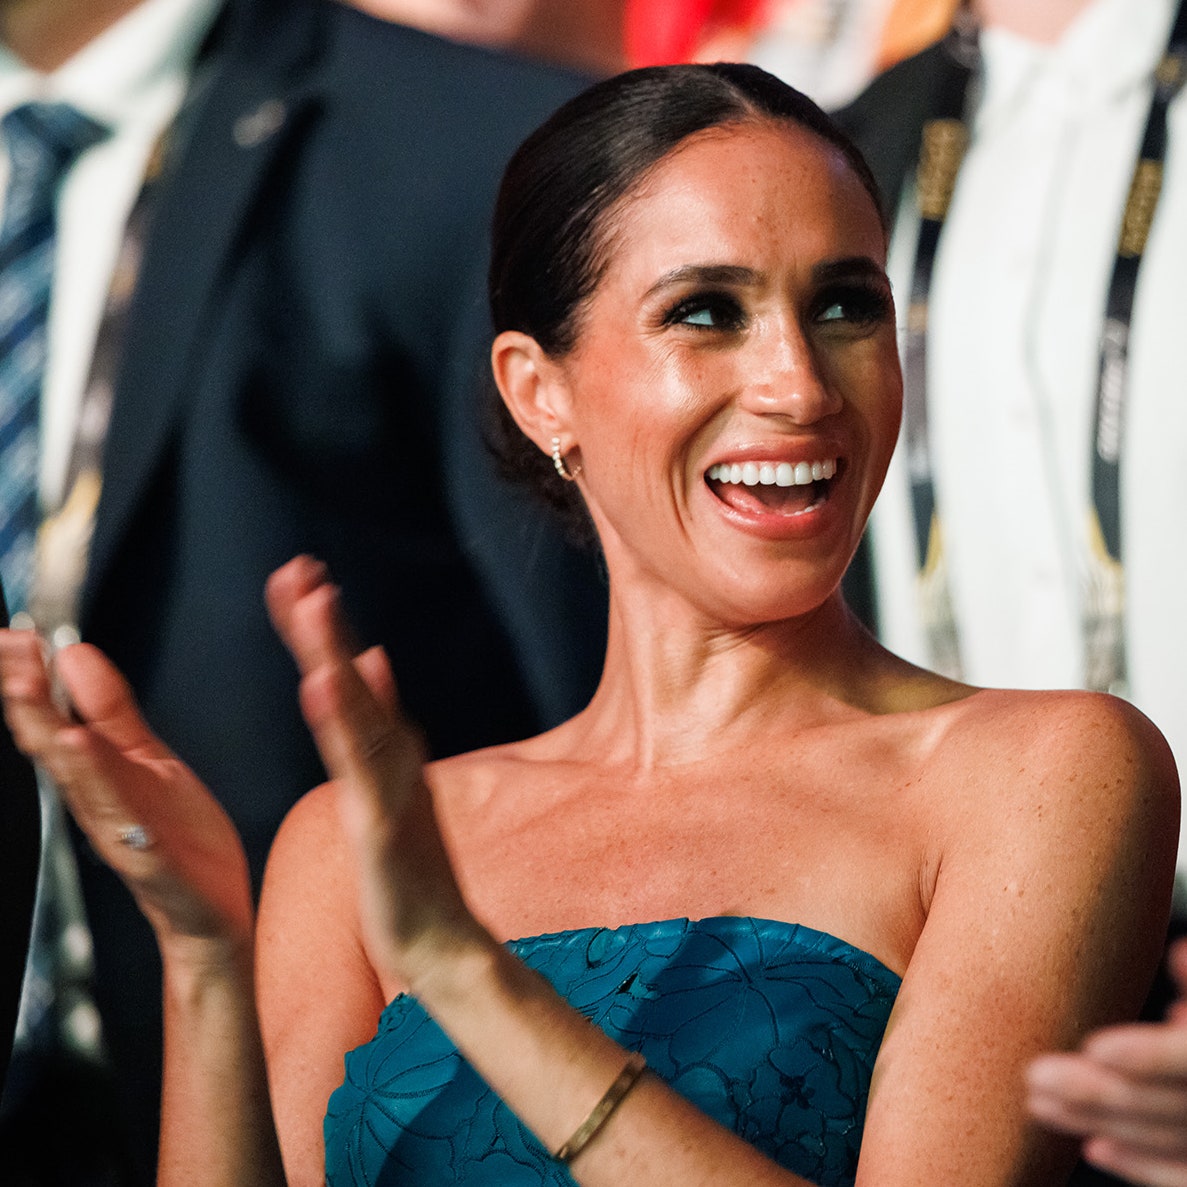 Meghan Markle Returns to Acting Roots with Cameo in Coffee Ad